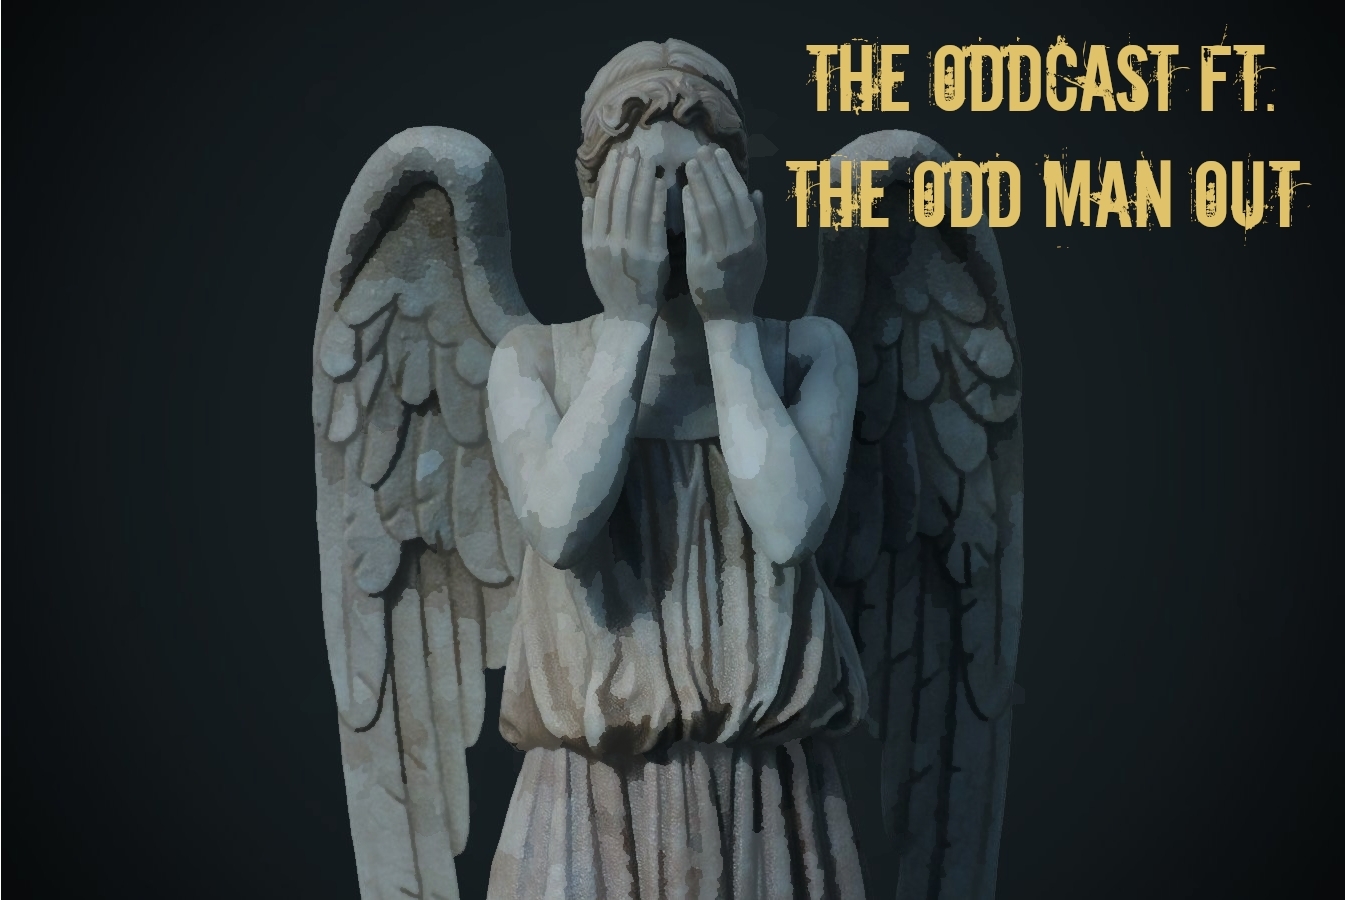 The Oddcast Ft. The Odd Man Out